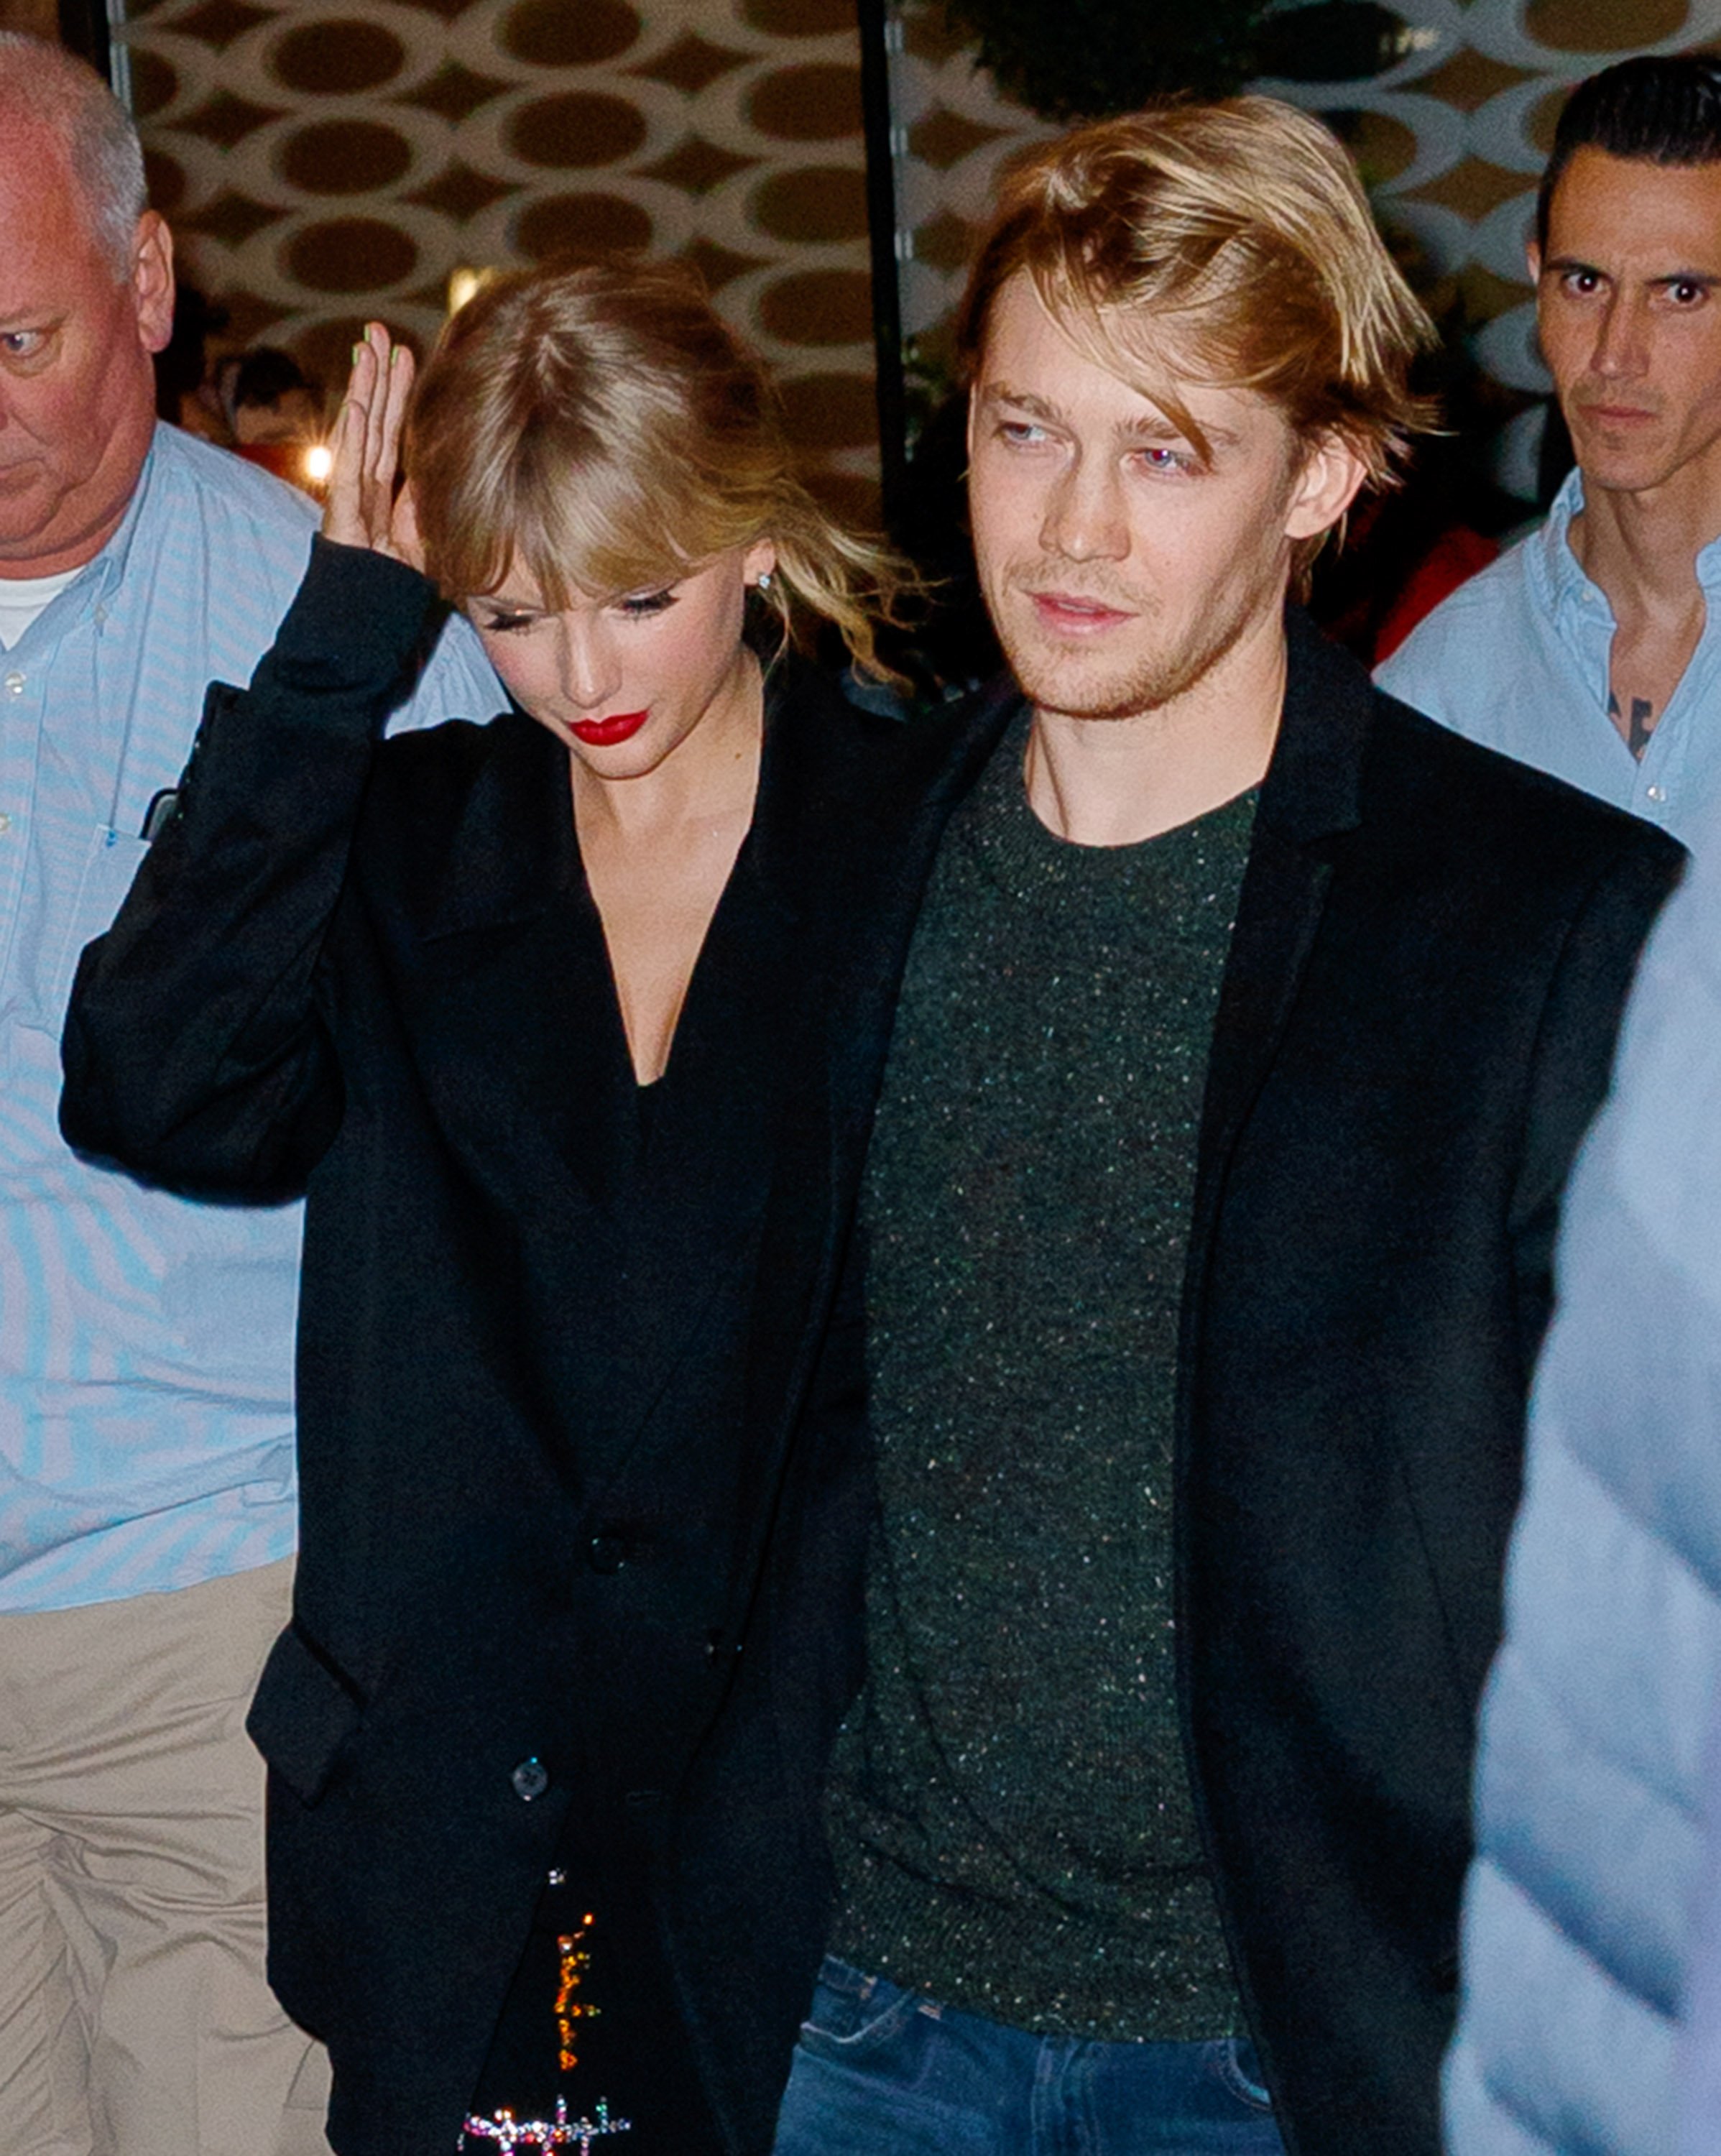 Taylor Swift and Joe Alwyn depart Zuma on October 6, 2019 in New York City. | Source: Getty Images